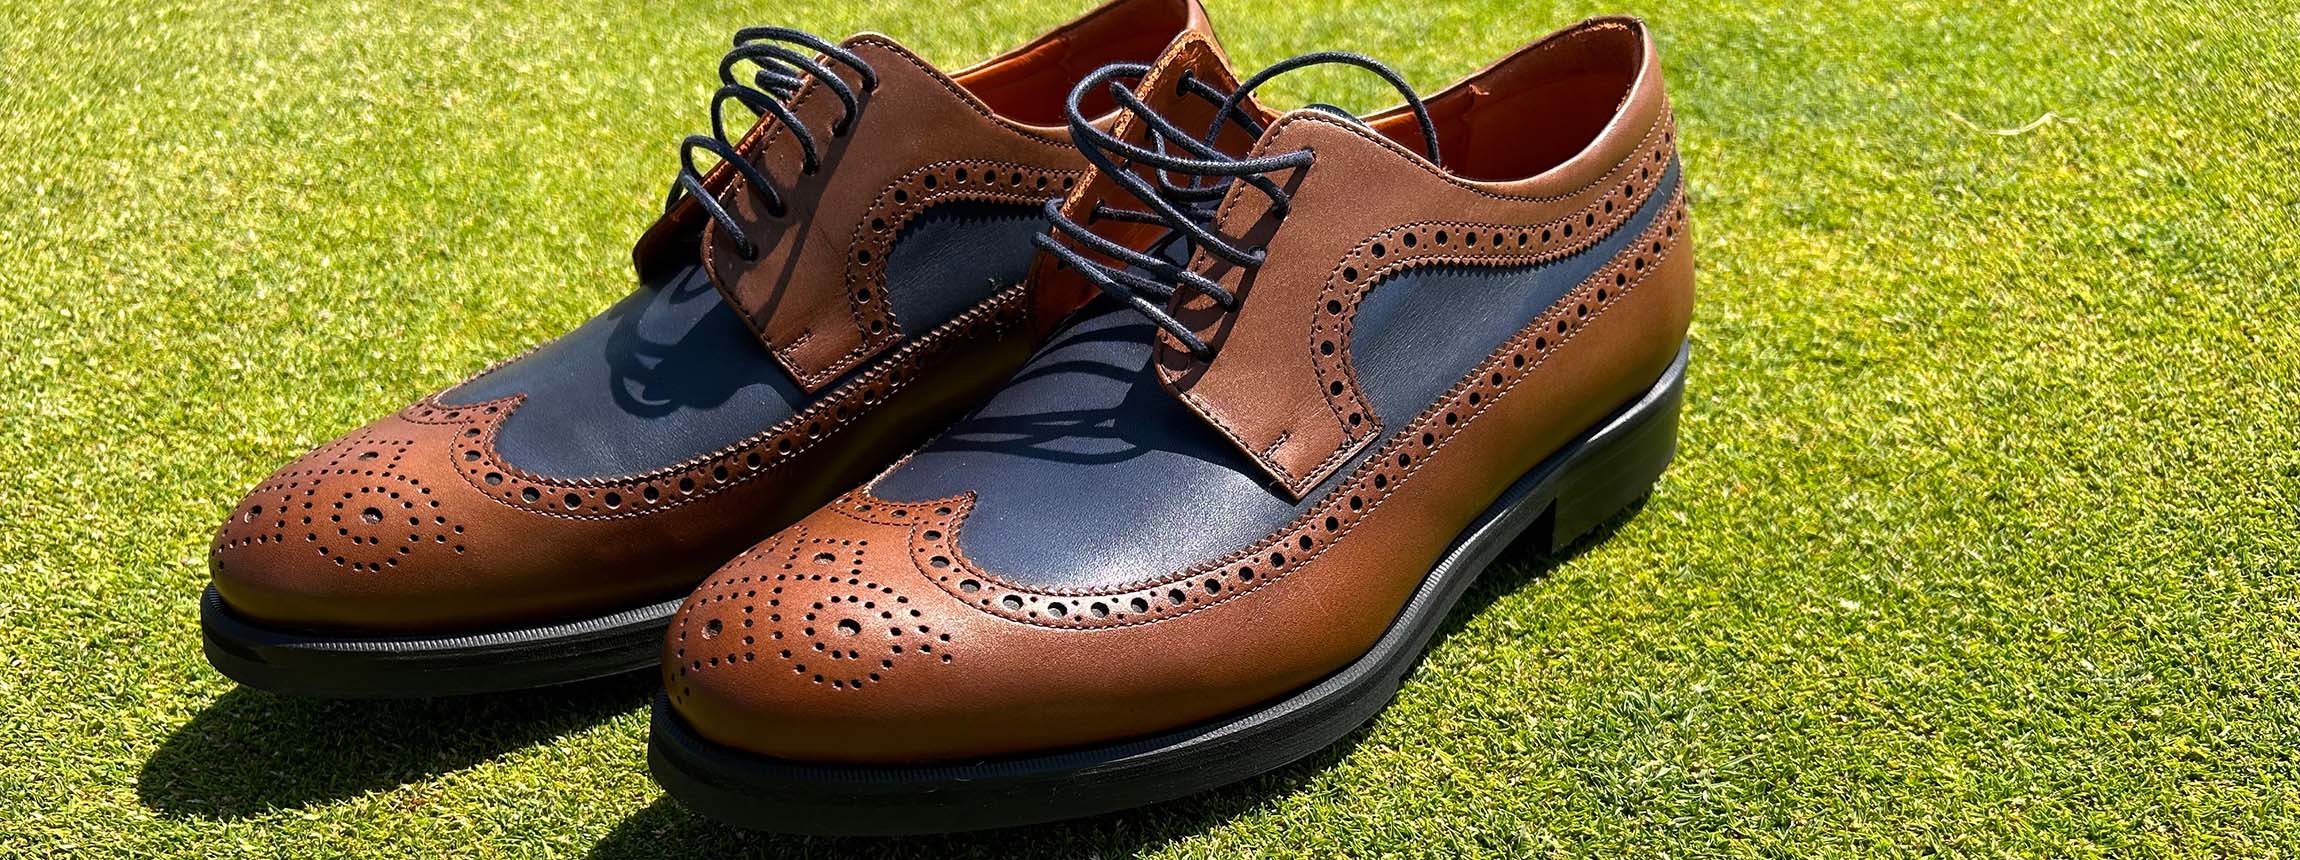 Elston Ave. Longwing Blucher No. 3965 Golf Soles By Robert August